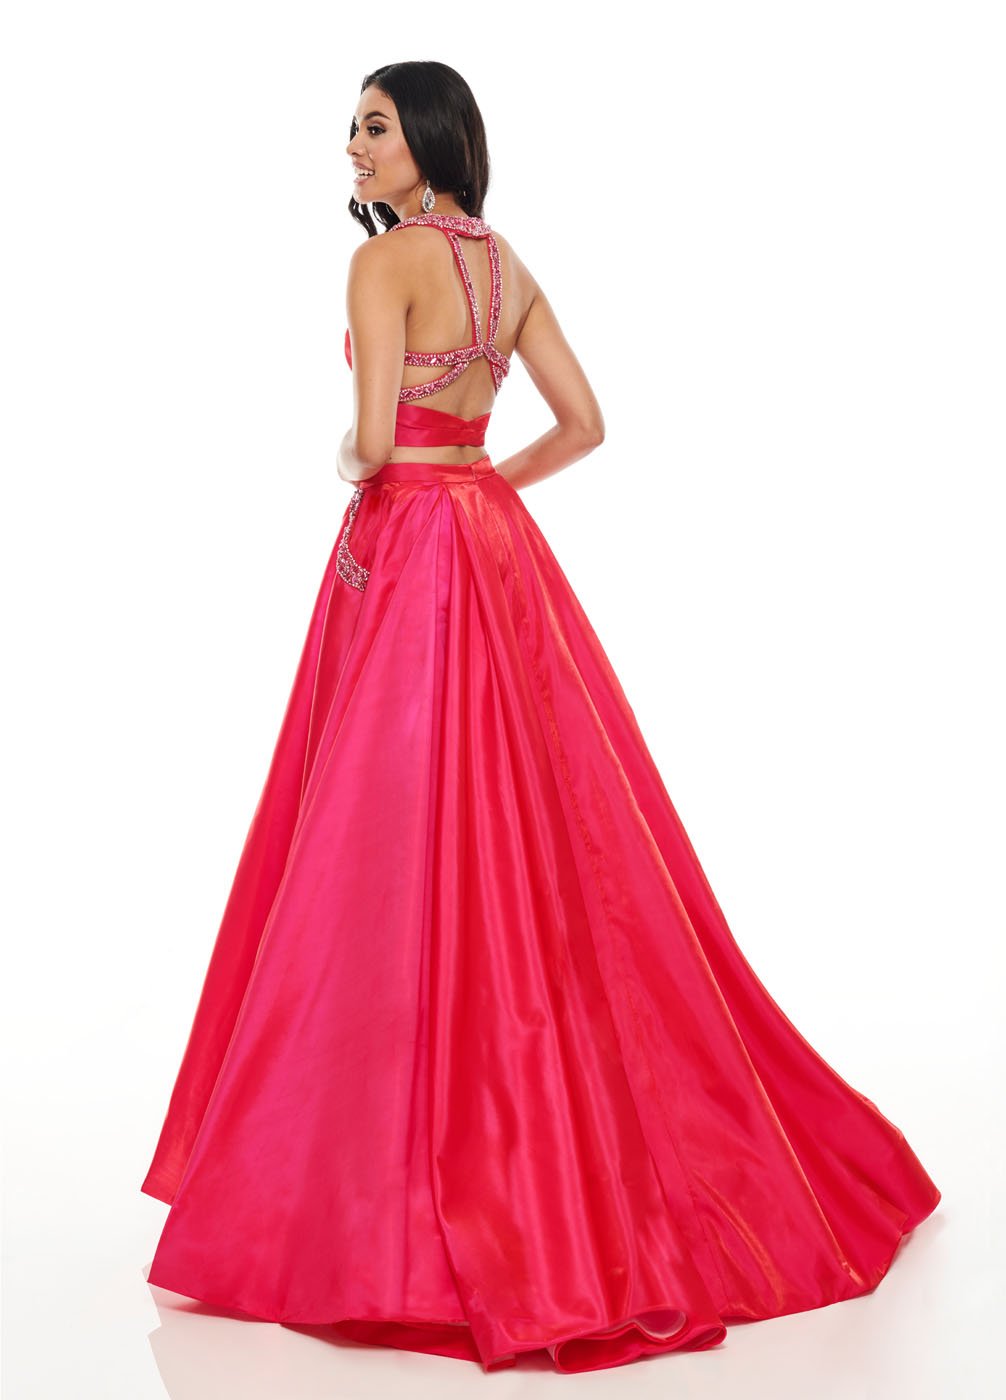 Rachel Allan 7009 dress images in these colors: Fuchsia Pink, Purple Pink, Royal Light Blue.